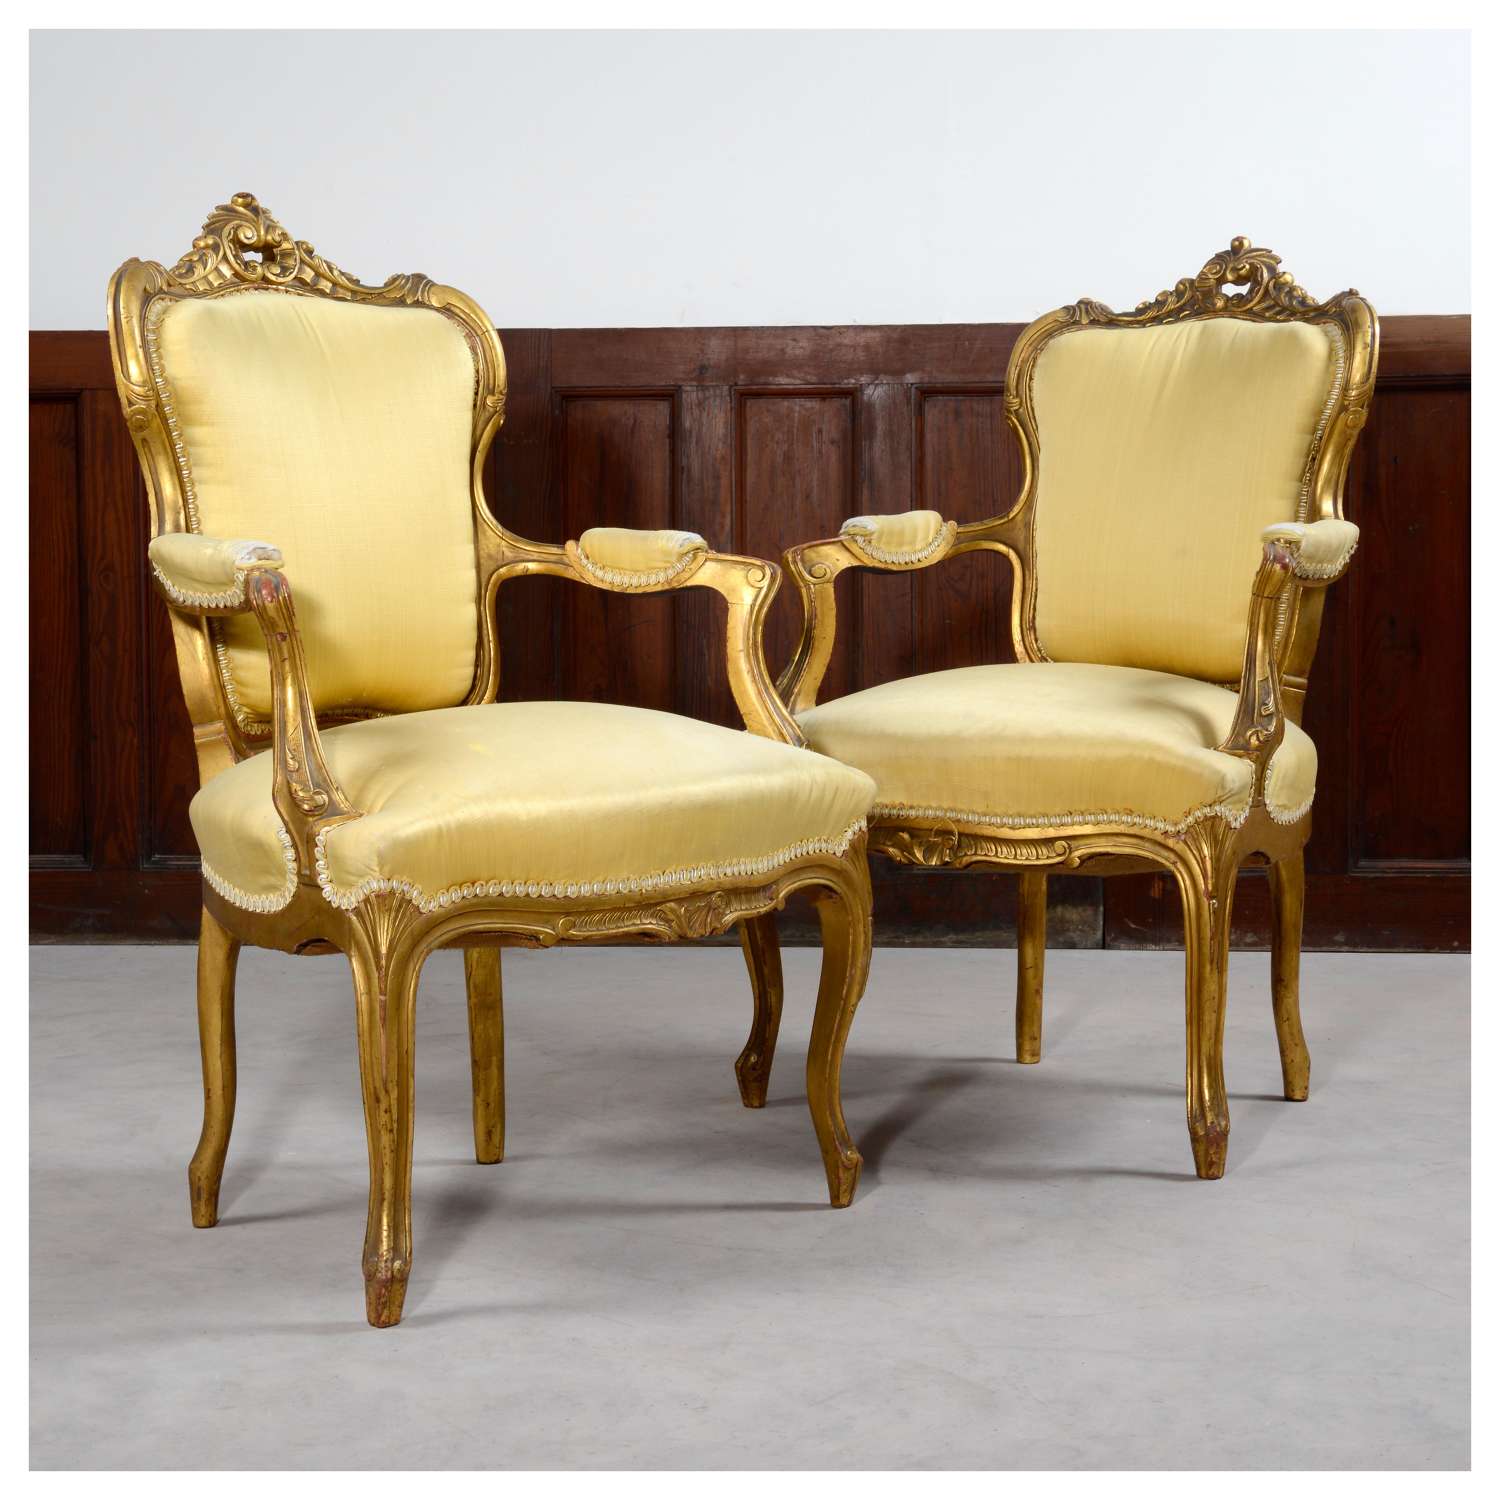 Pair of French Louis XV style gilt armchairs, or fauteuils